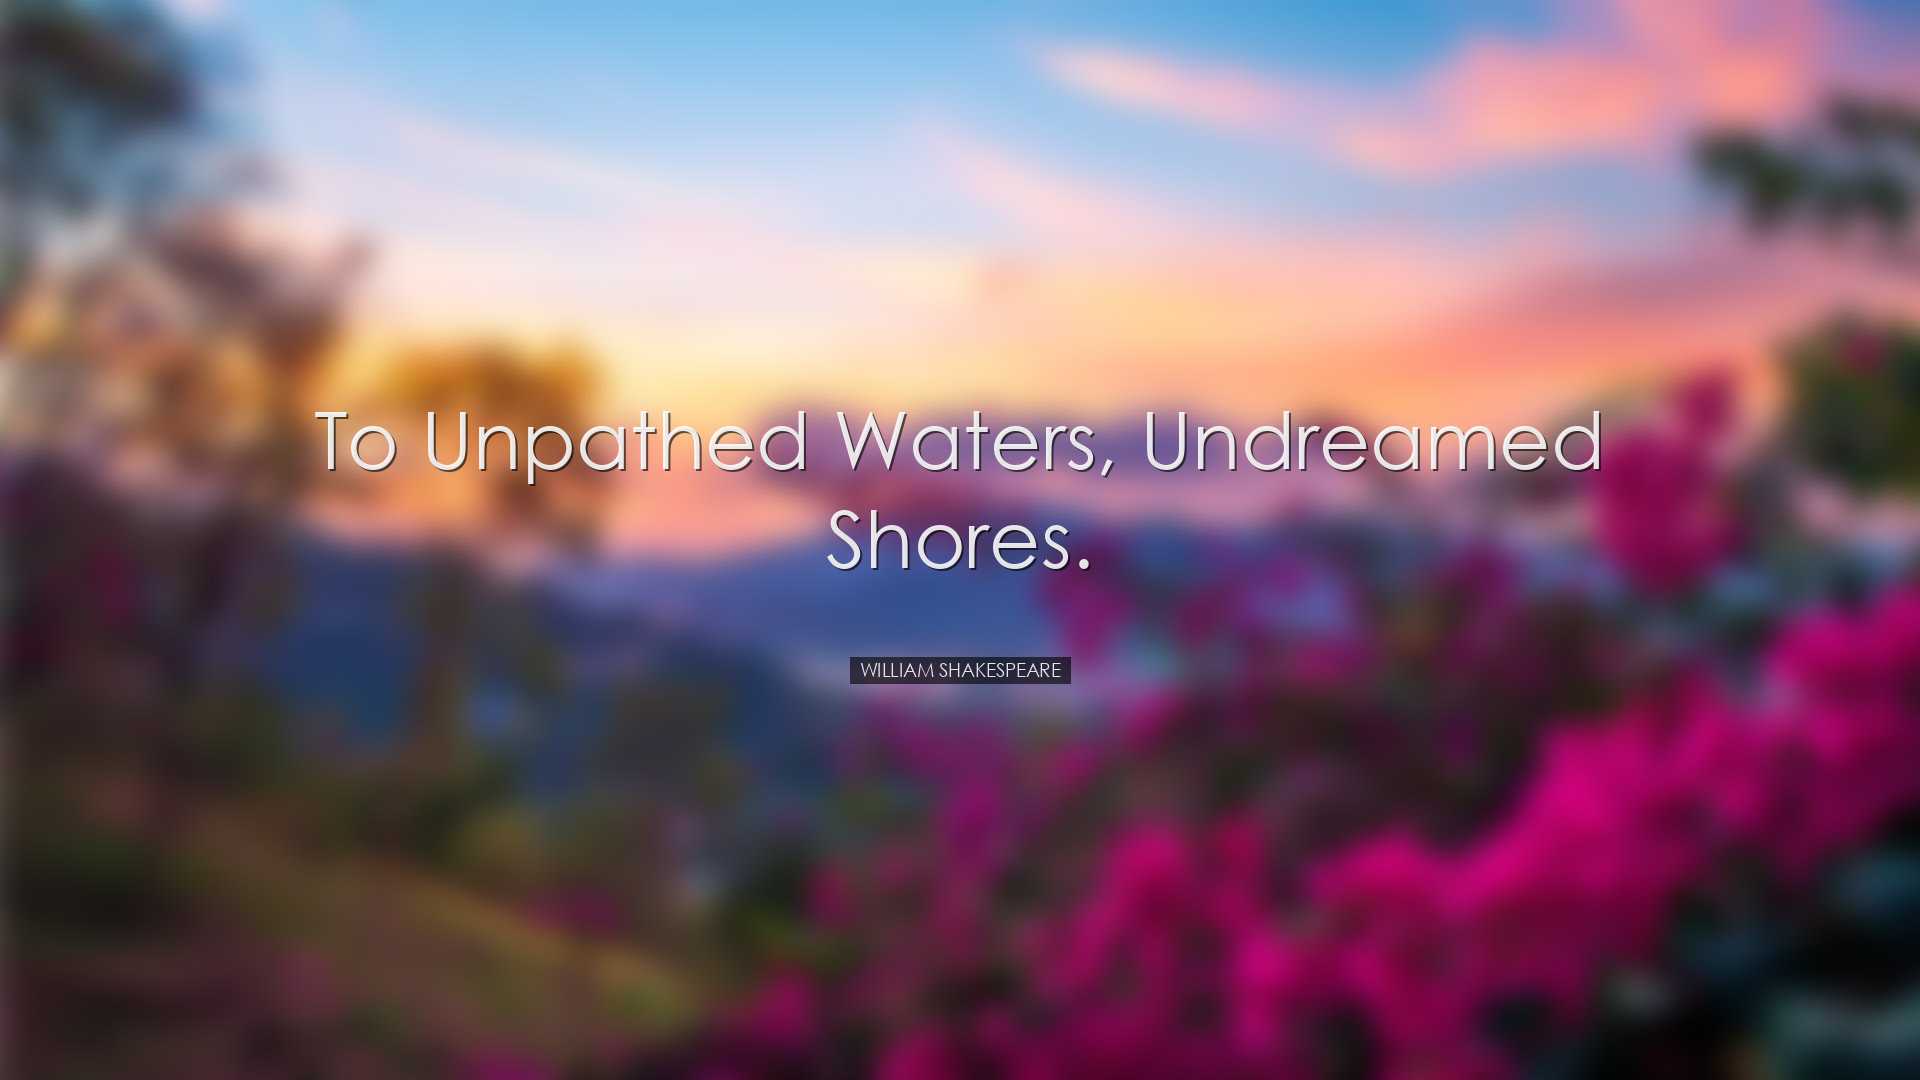 To unpathed waters, undreamed shores. - William Shakespeare